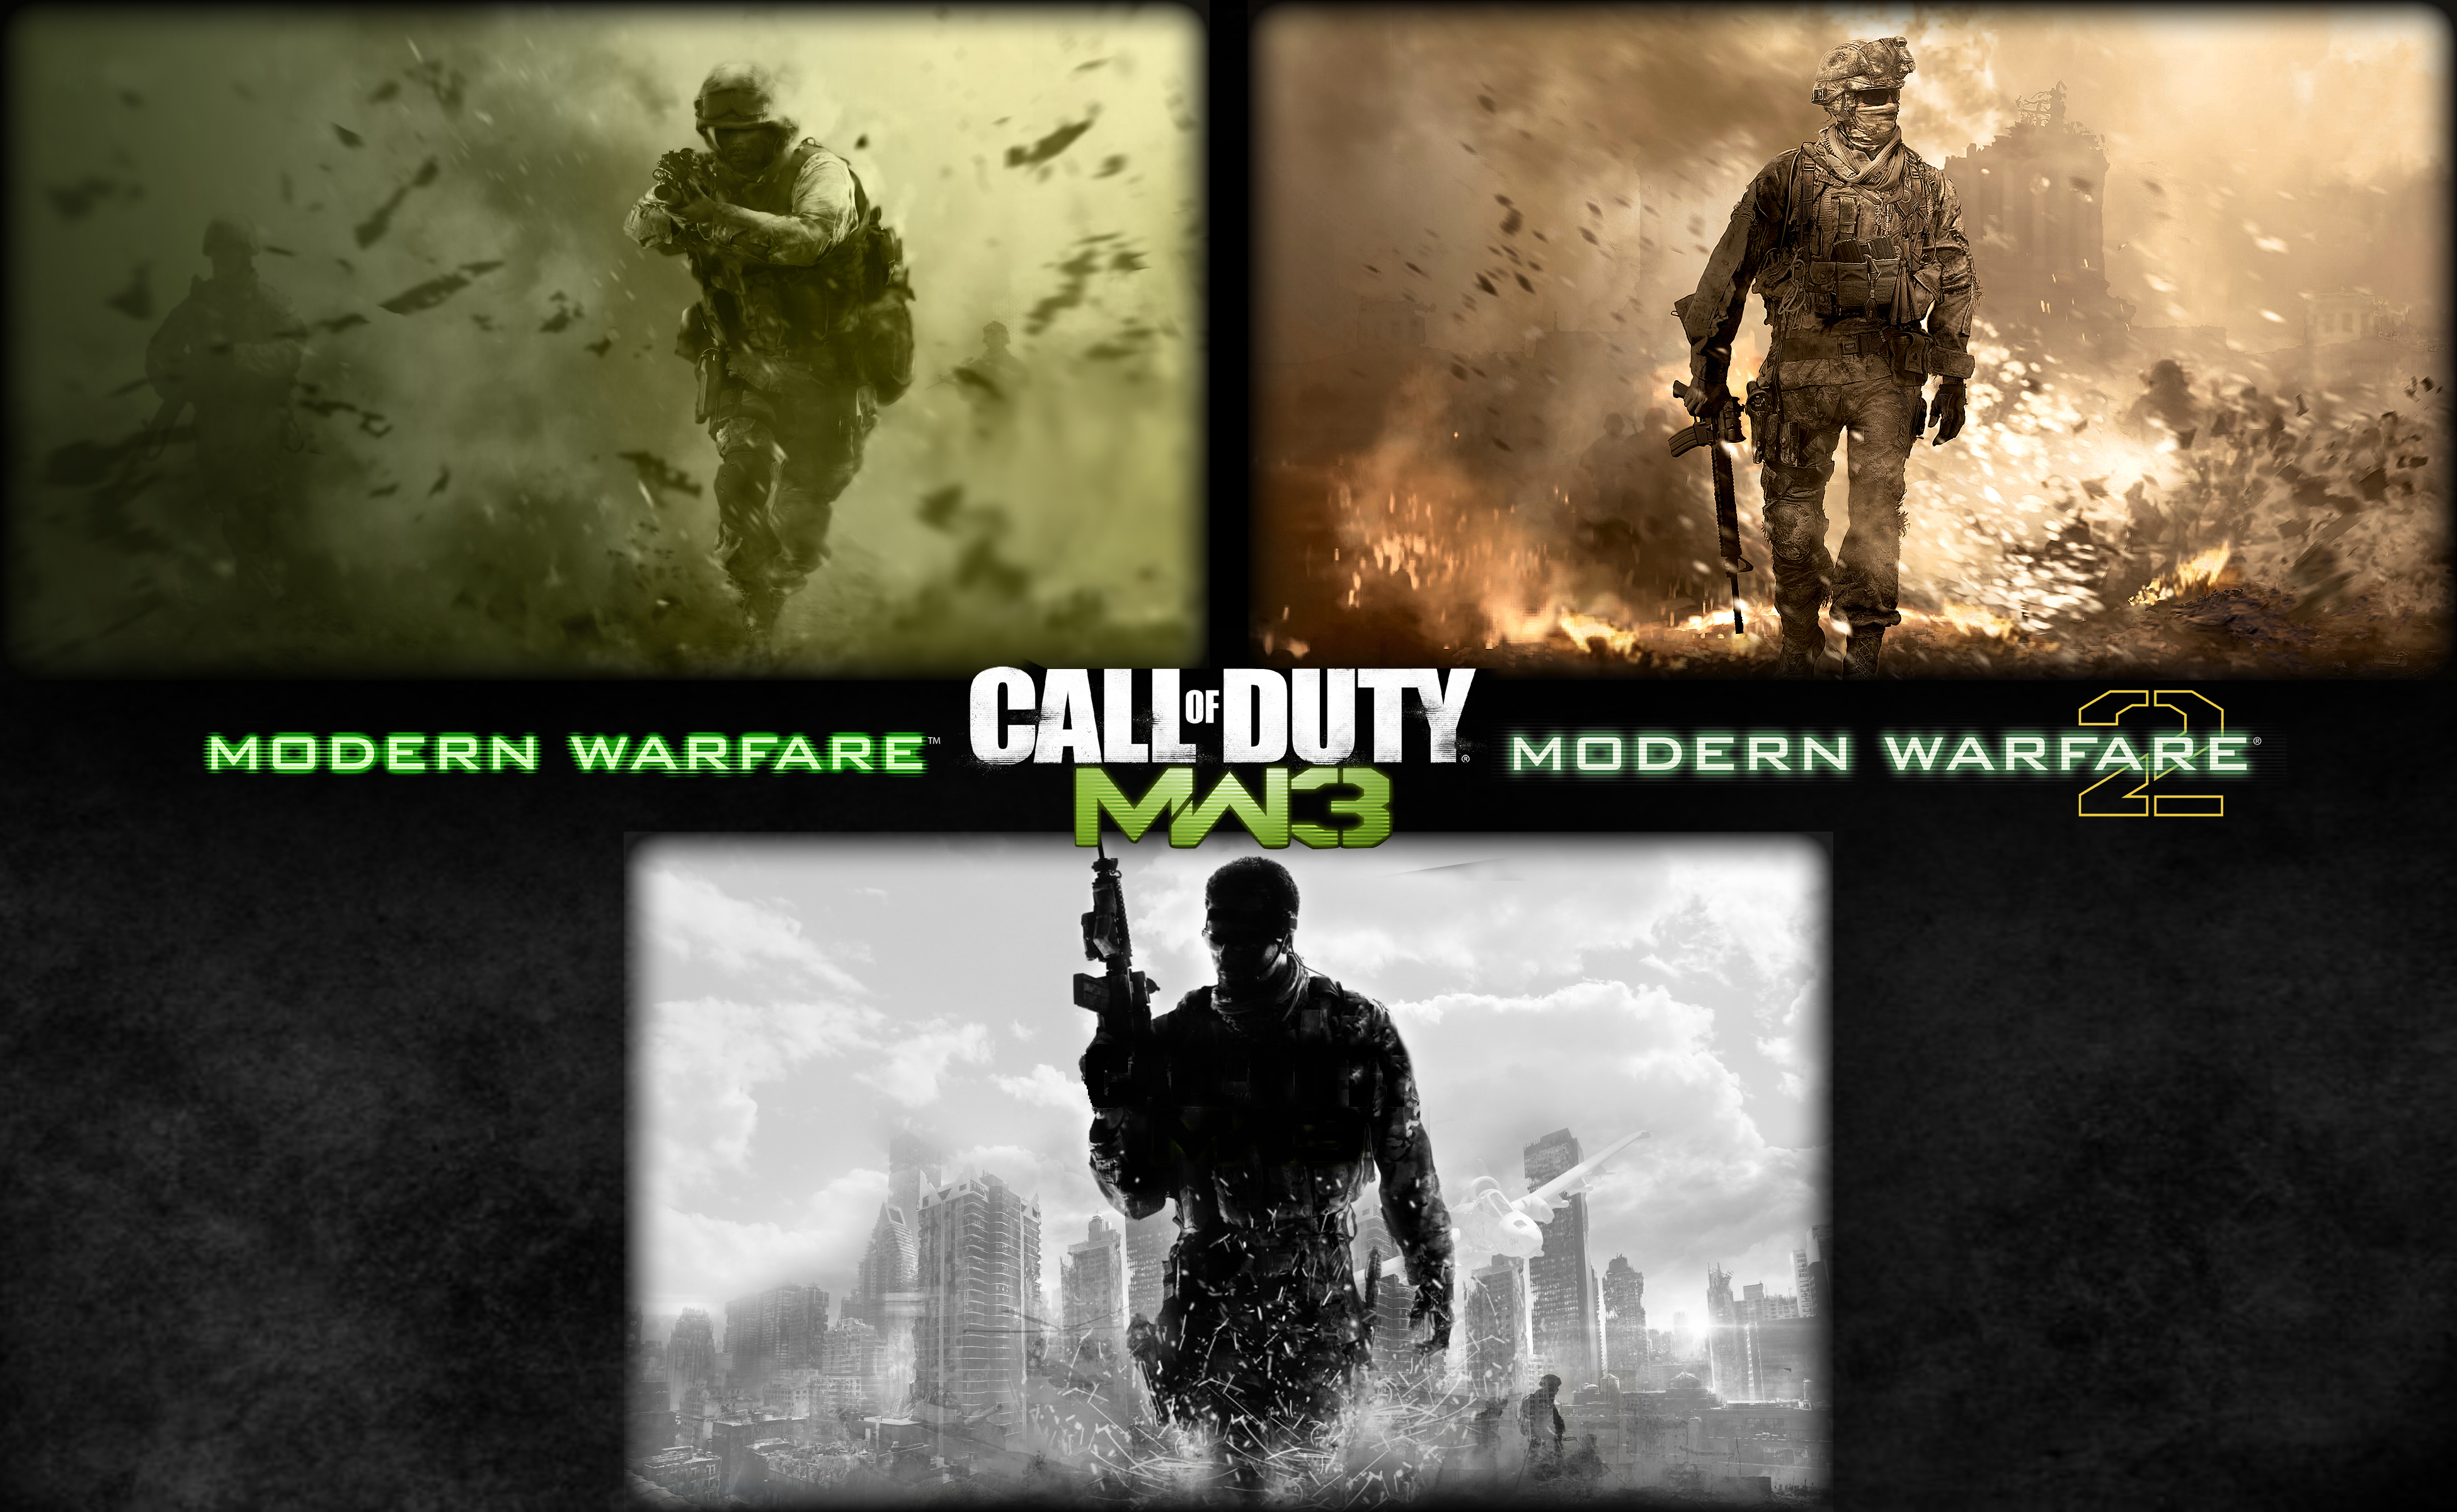 Latest Mobile Wallpaper call of duty: modern warfare 3, call of duty, video game